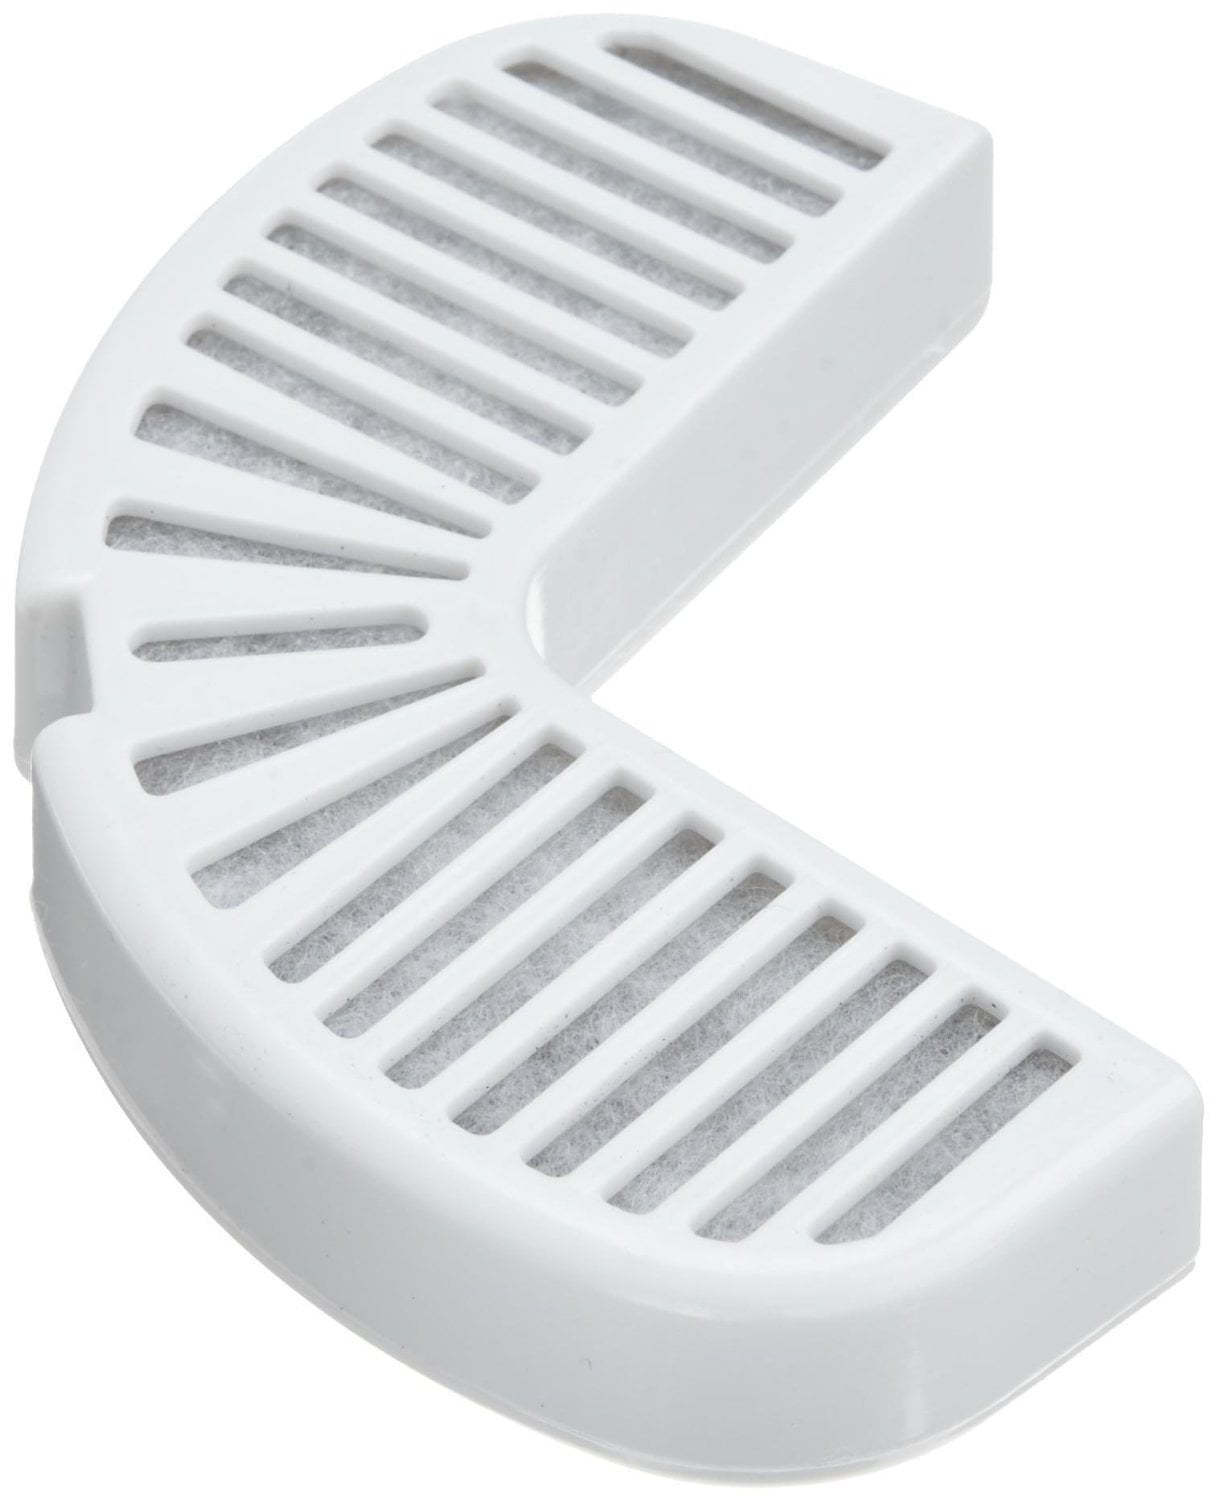 2 Pack 6 Filters Pioneer Pet Replacement Filters for Ceramic and Stainless Steel Fountains 